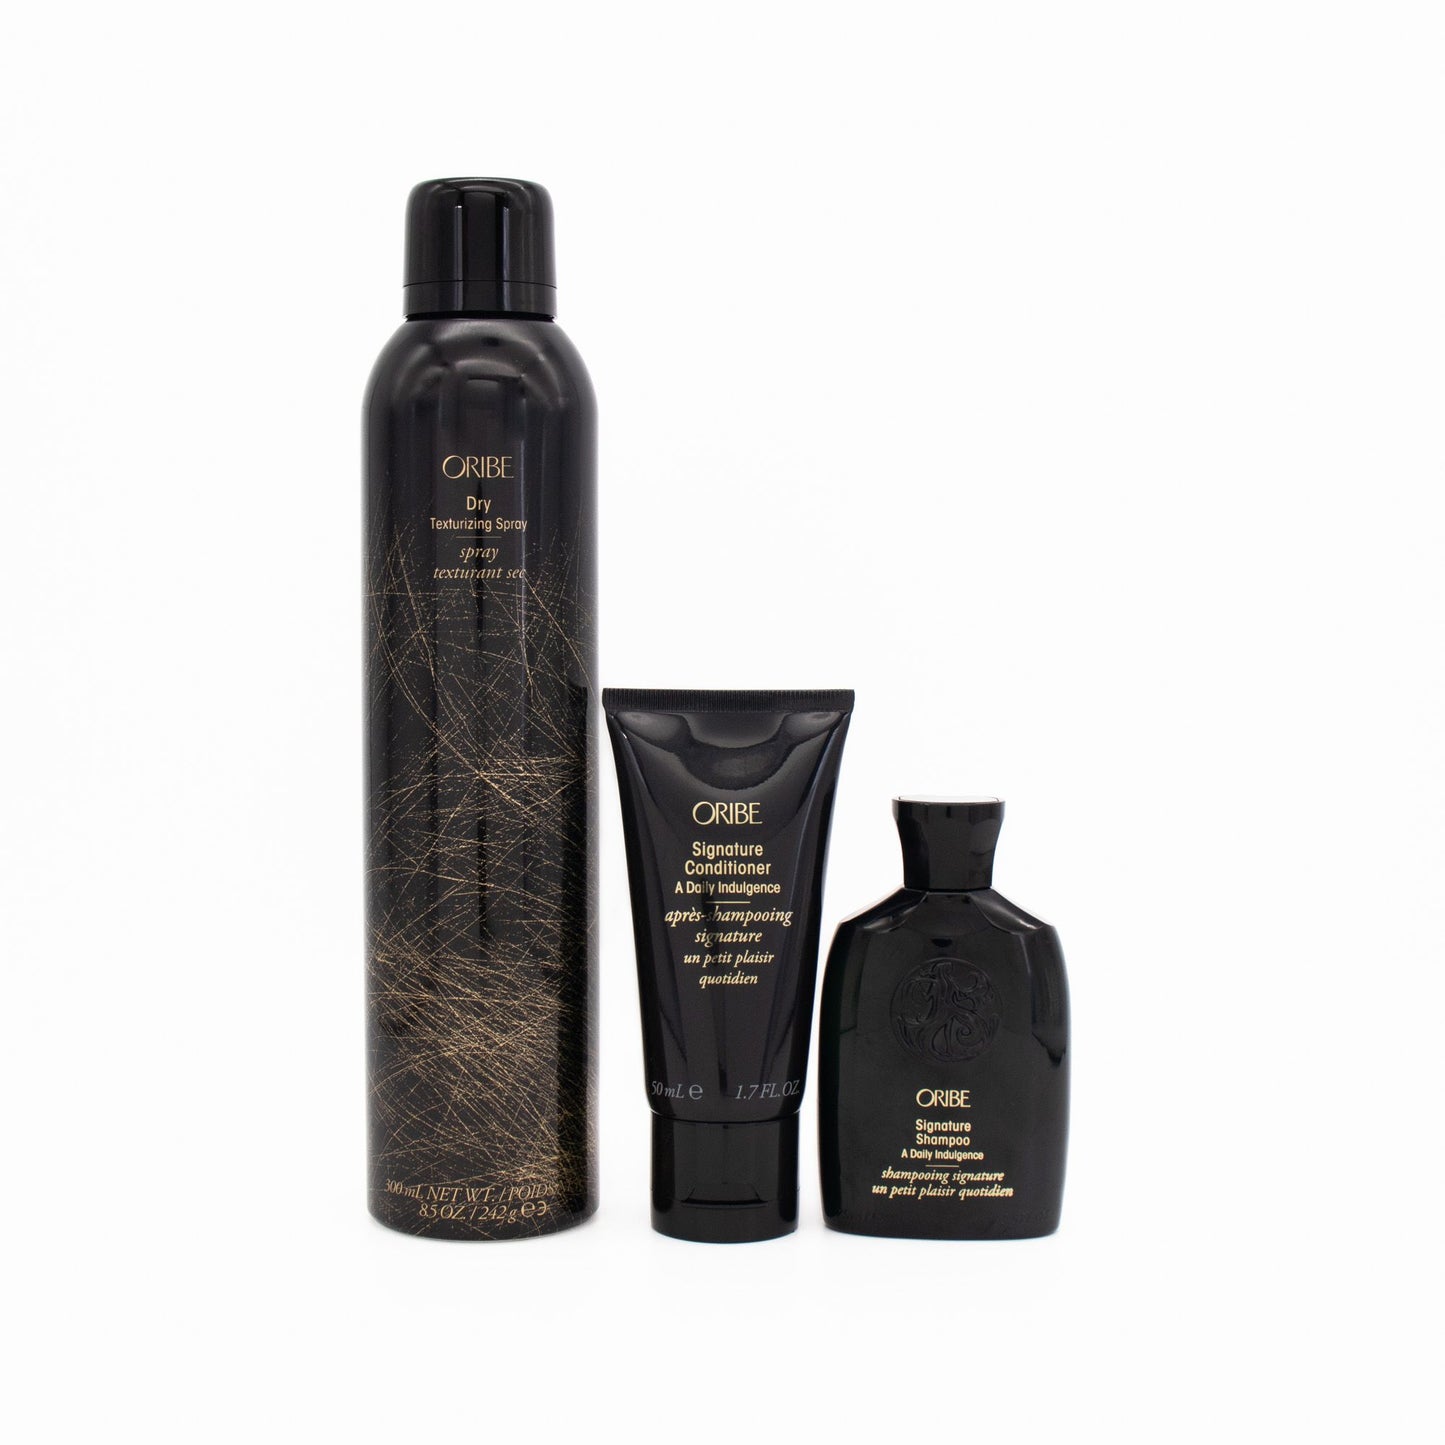 Oribe Signature Style 3 Piece Haircare Set - Imperfect Box